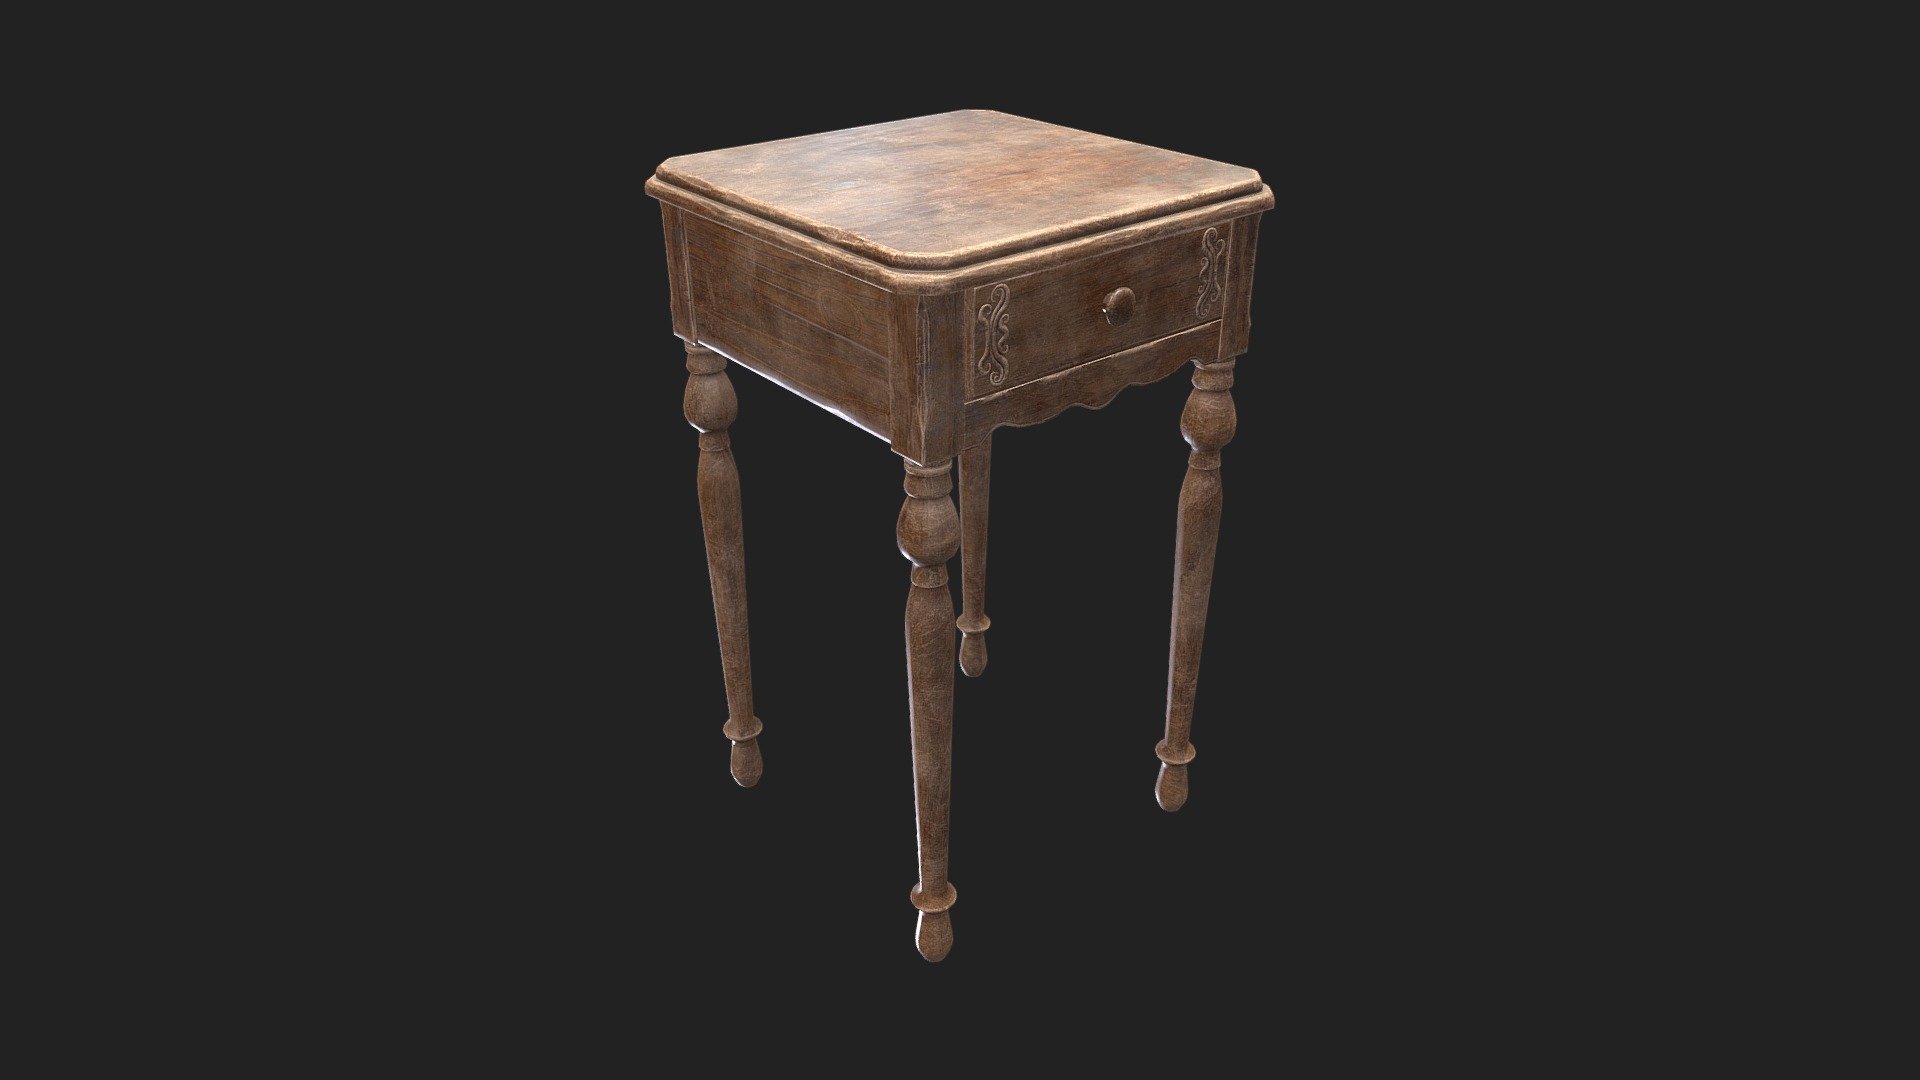 The drawer is separated from the table and openable.

2048x2048 textures packs (PBR Metal Rough, Unity HDRP, Unity Standard Metallic and UE4):

PBR Metal Rough- BaseColor, AO, Height, Normal, Roughness and Metallic;

Unity HDRP: BaseColor, MaskMap, Normal;

Unity Standard Metallic: AlbedoTransparency, MetallicSmoothness, Normal;

Unreal Engine 4: BaseColor, Normal, OcclusionRoughnessMetallic;

The package also has the .fbx, .obj, .dae and .blend file 3d model